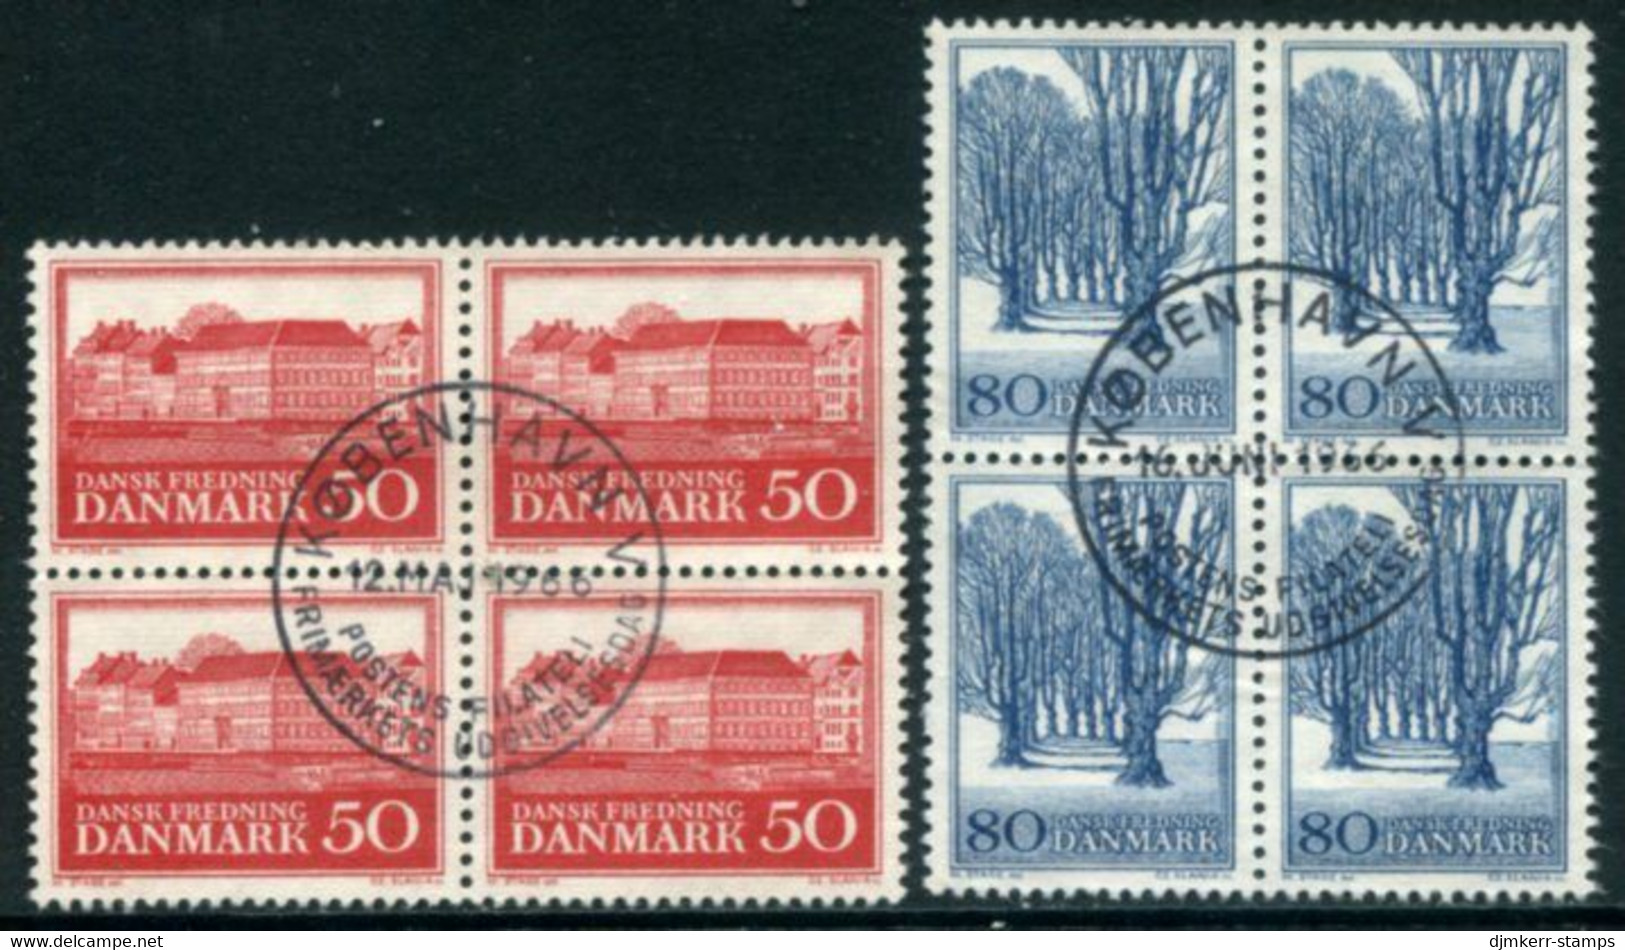 DENMARK 1966 Nature And Monument Protection Blocks Of 4 Used   Michel 442-43x - Used Stamps